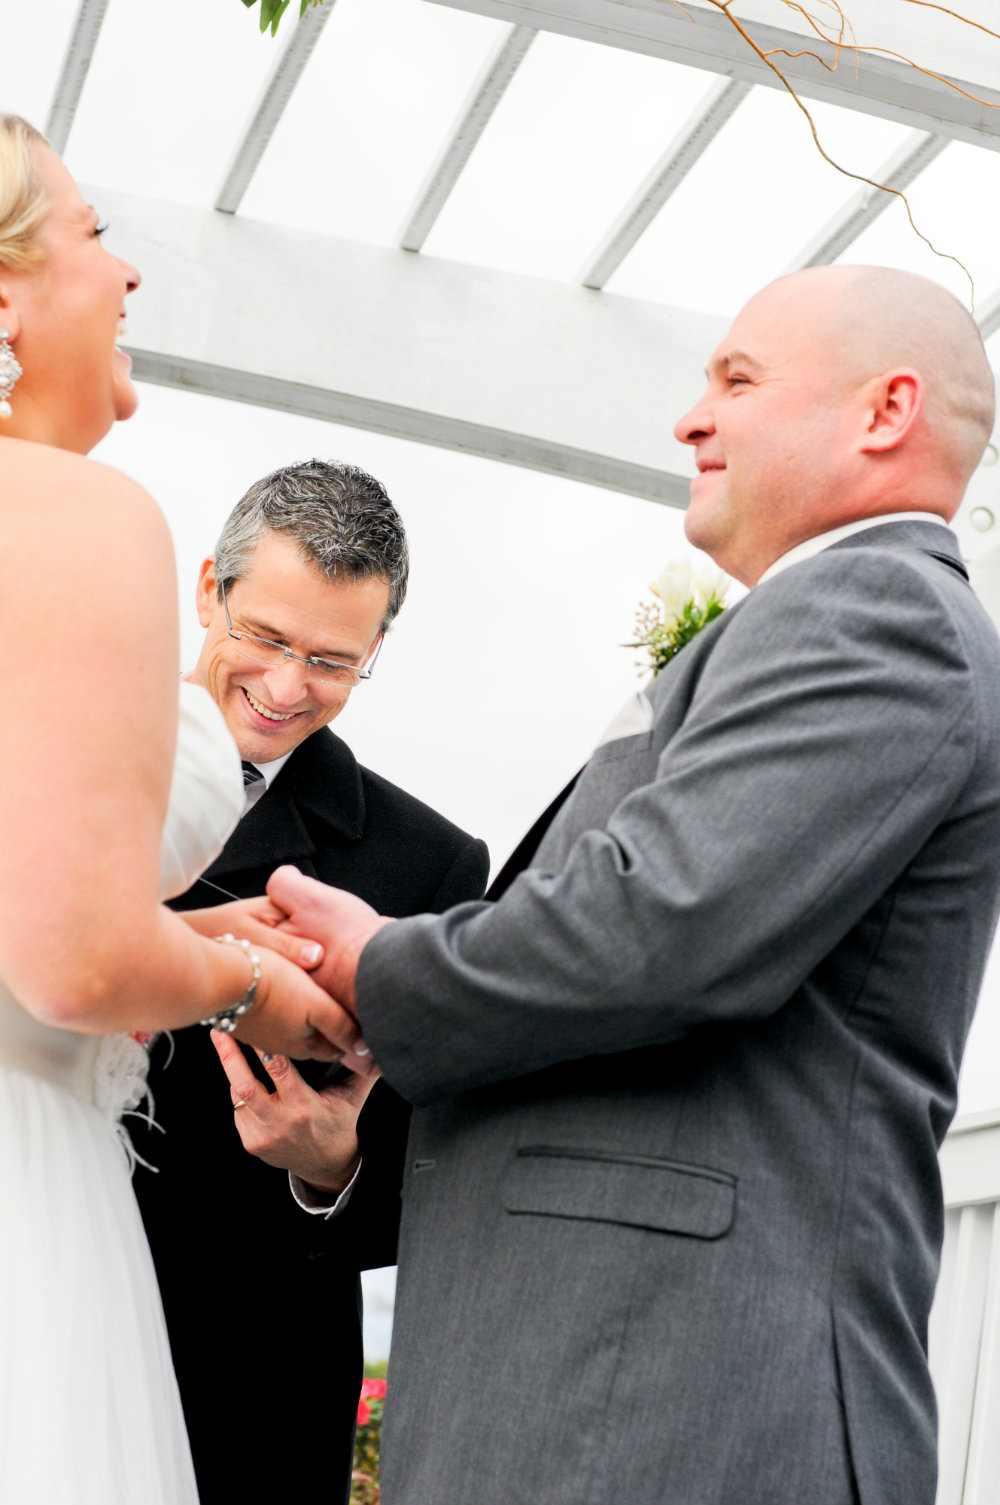 Wedding officiant, Damian King, of United Marriage Services, Columbus, OH